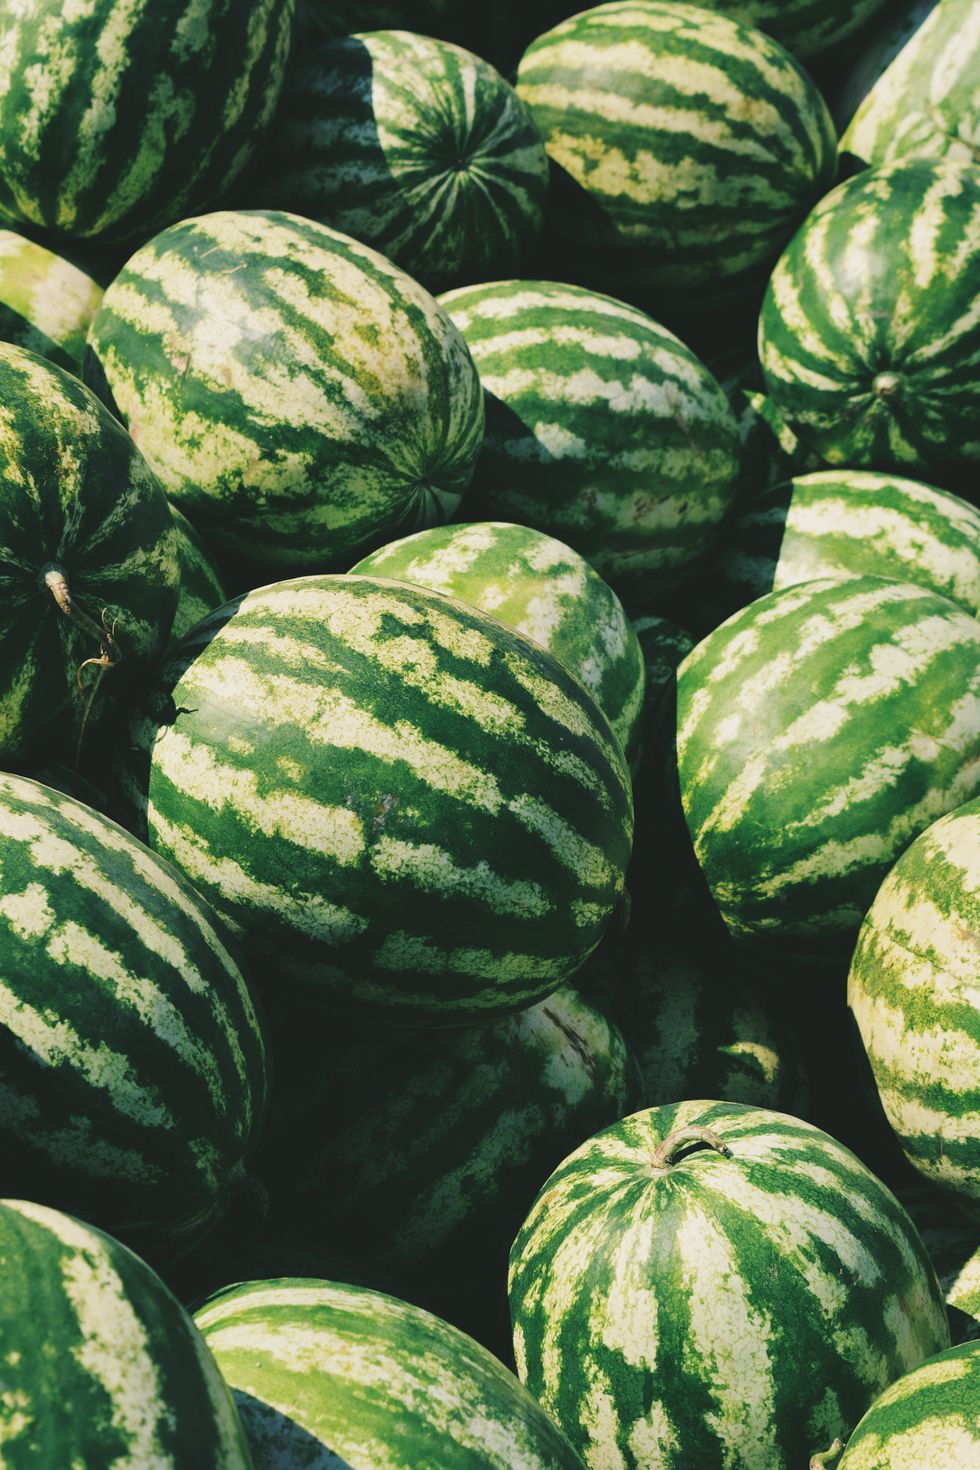 7 Reasons Watermelons Are The Best Fruit, And If You Disagree, You're Bananas